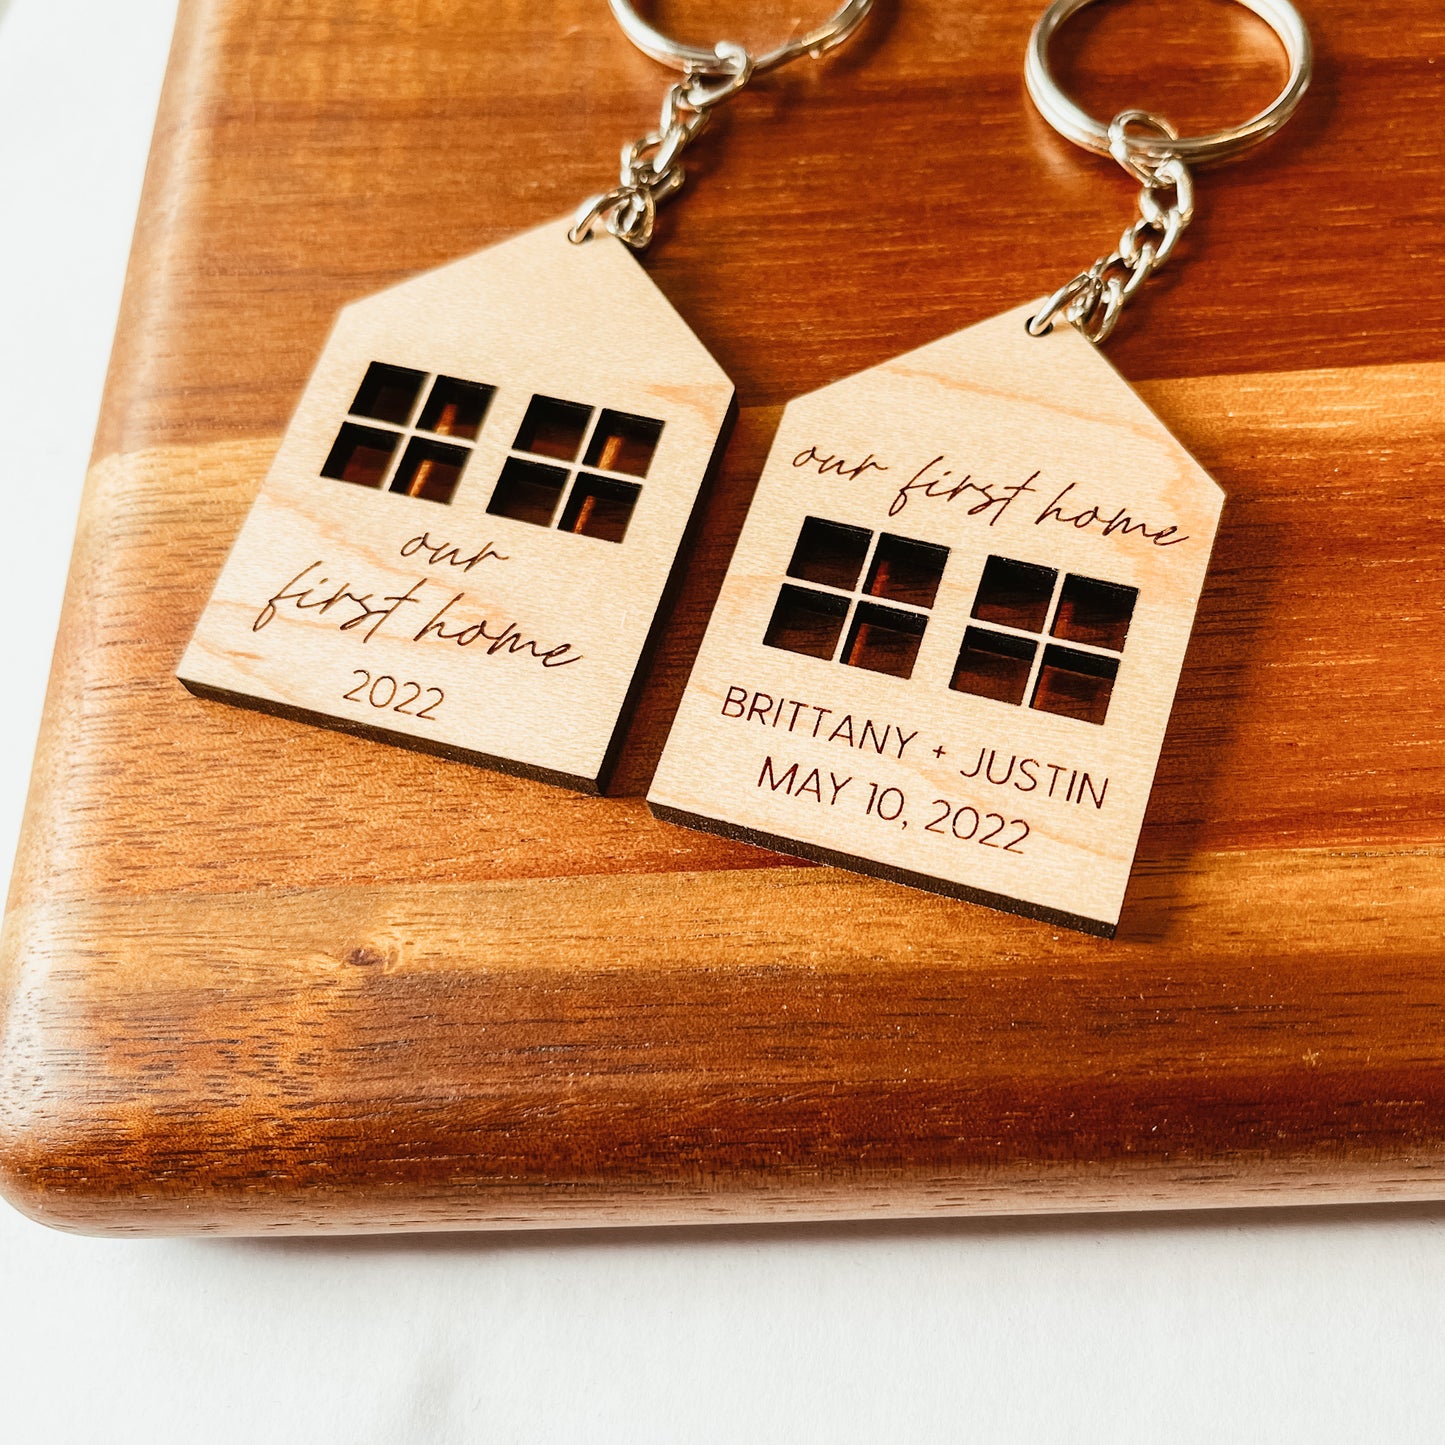 First Home Keychain (Single or Set)